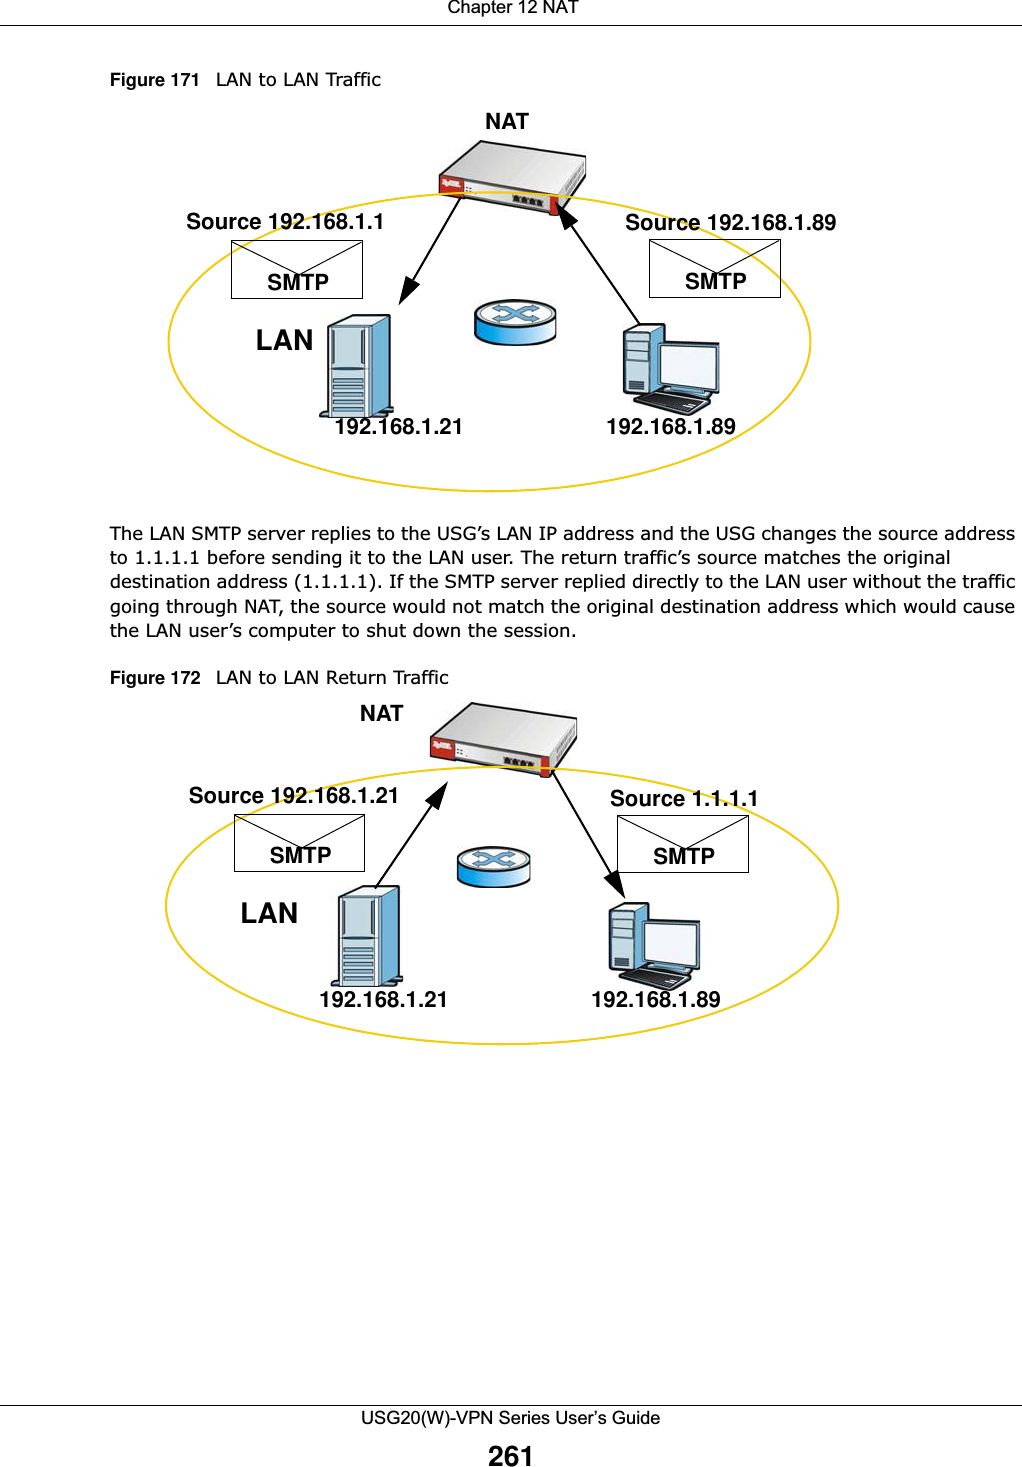  Chapter 12 NATUSG20(W)-VPN Series User’s Guide261Figure 171   LAN to LAN Traffic  The LAN SMTP server replies to the USG’s LAN IP address and the USG changes the source address to 1.1.1.1 before sending it to the LAN user. The return traffic’s source matches the original destination address (1.1.1.1). If the SMTP server replied directly to the LAN user without the traffic going through NAT, the source would not match the original destination address which would cause the LAN user’s computer to shut down the session.  Figure 172   LAN to LAN Return Traffic    192.168.1.21LAN192.168.1.89Source 192.168.1.89SMTPNATSource 192.168.1.1SMTP192.168.1.21LAN192.168.1.89Source 1.1.1.1SMTPNATSource 192.168.1.21SMTP